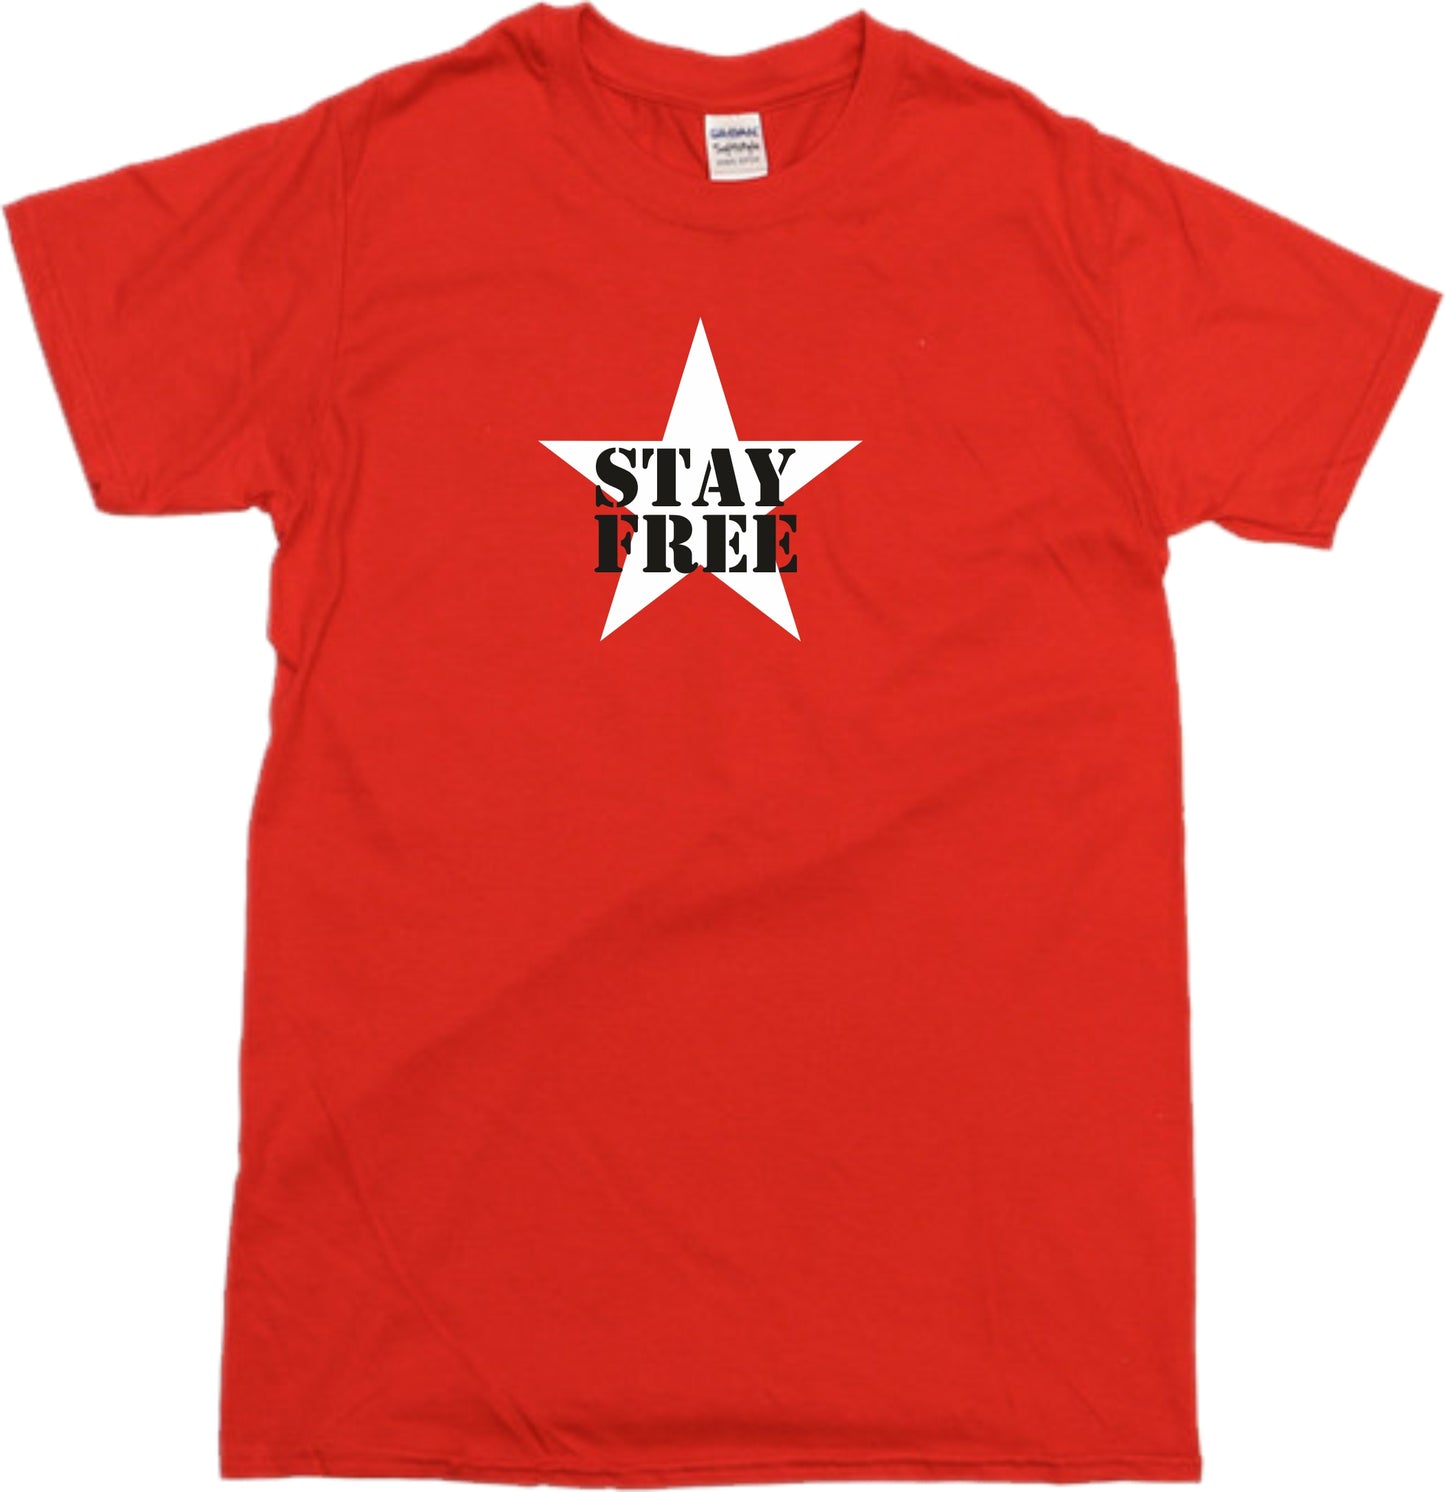 Stay Free Star T-Shirt - Retro Punk Rock, Protest, Various Colours